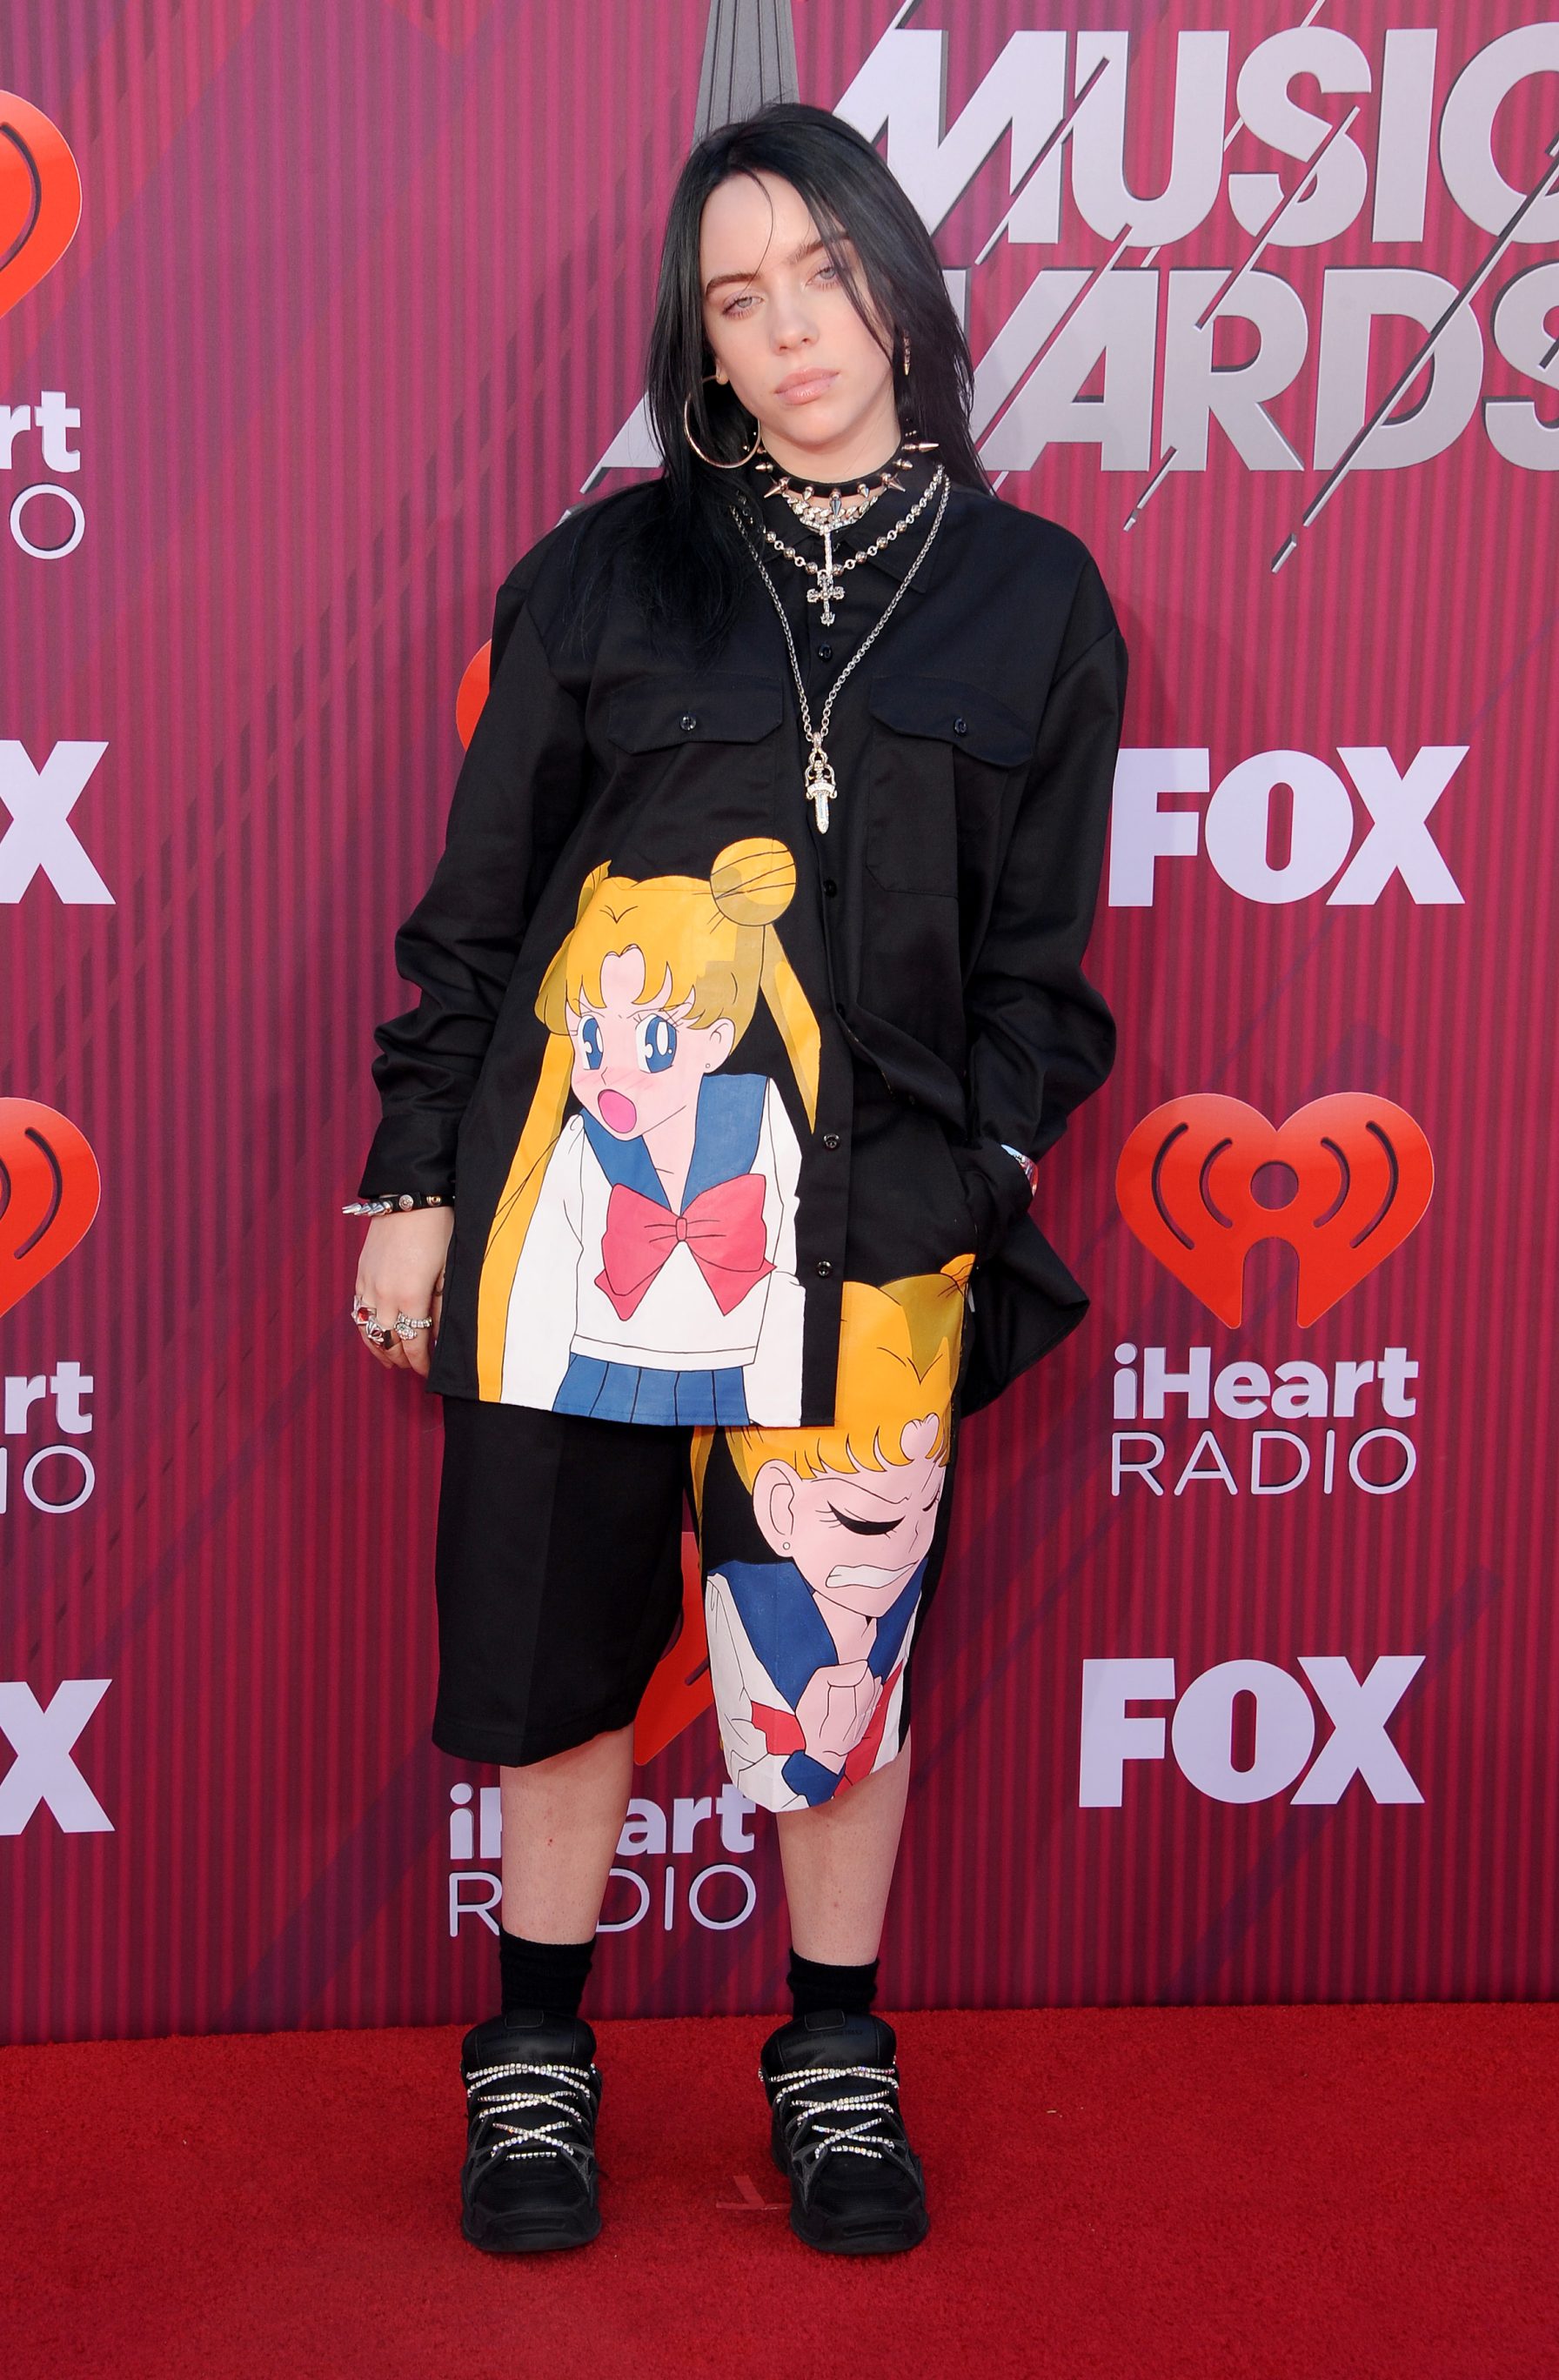 iHeart Radio Awards 2019 Outfit